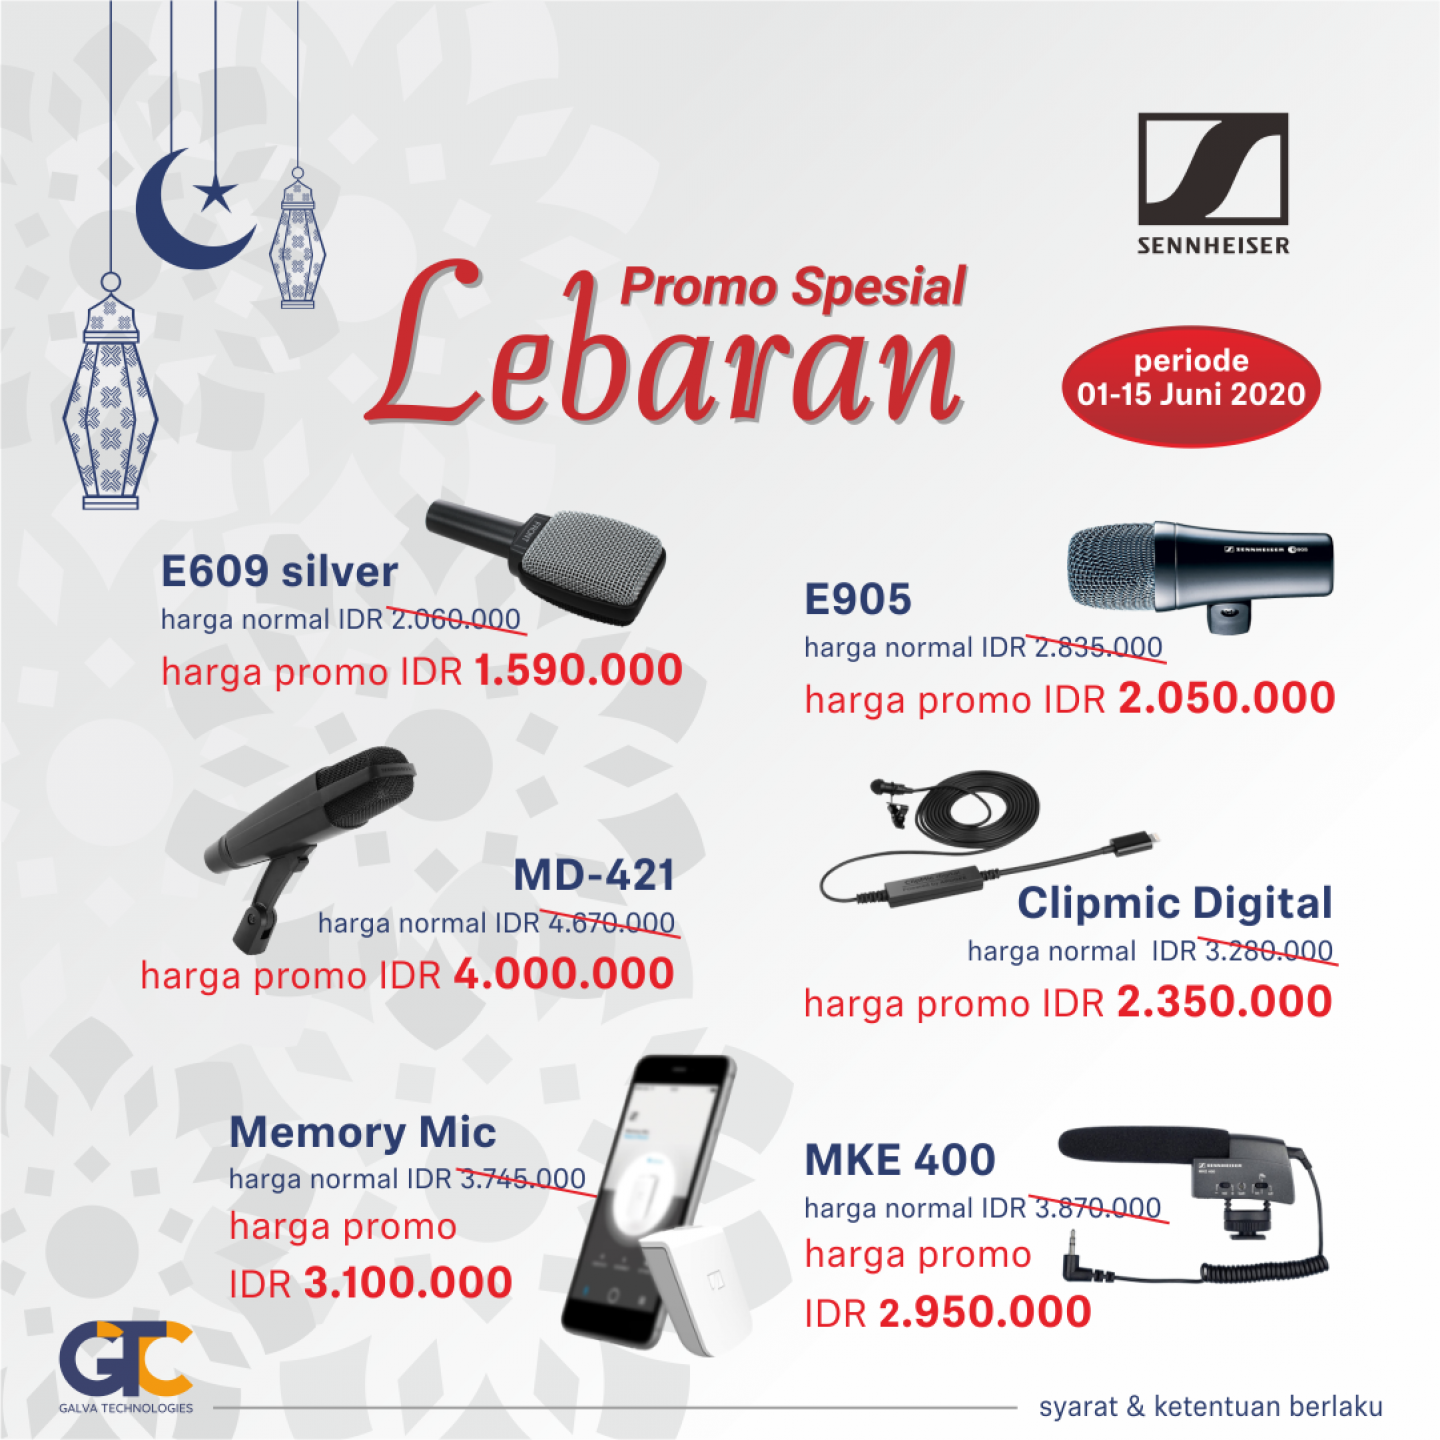 Special Lebaran Promotion for Sennheiser products